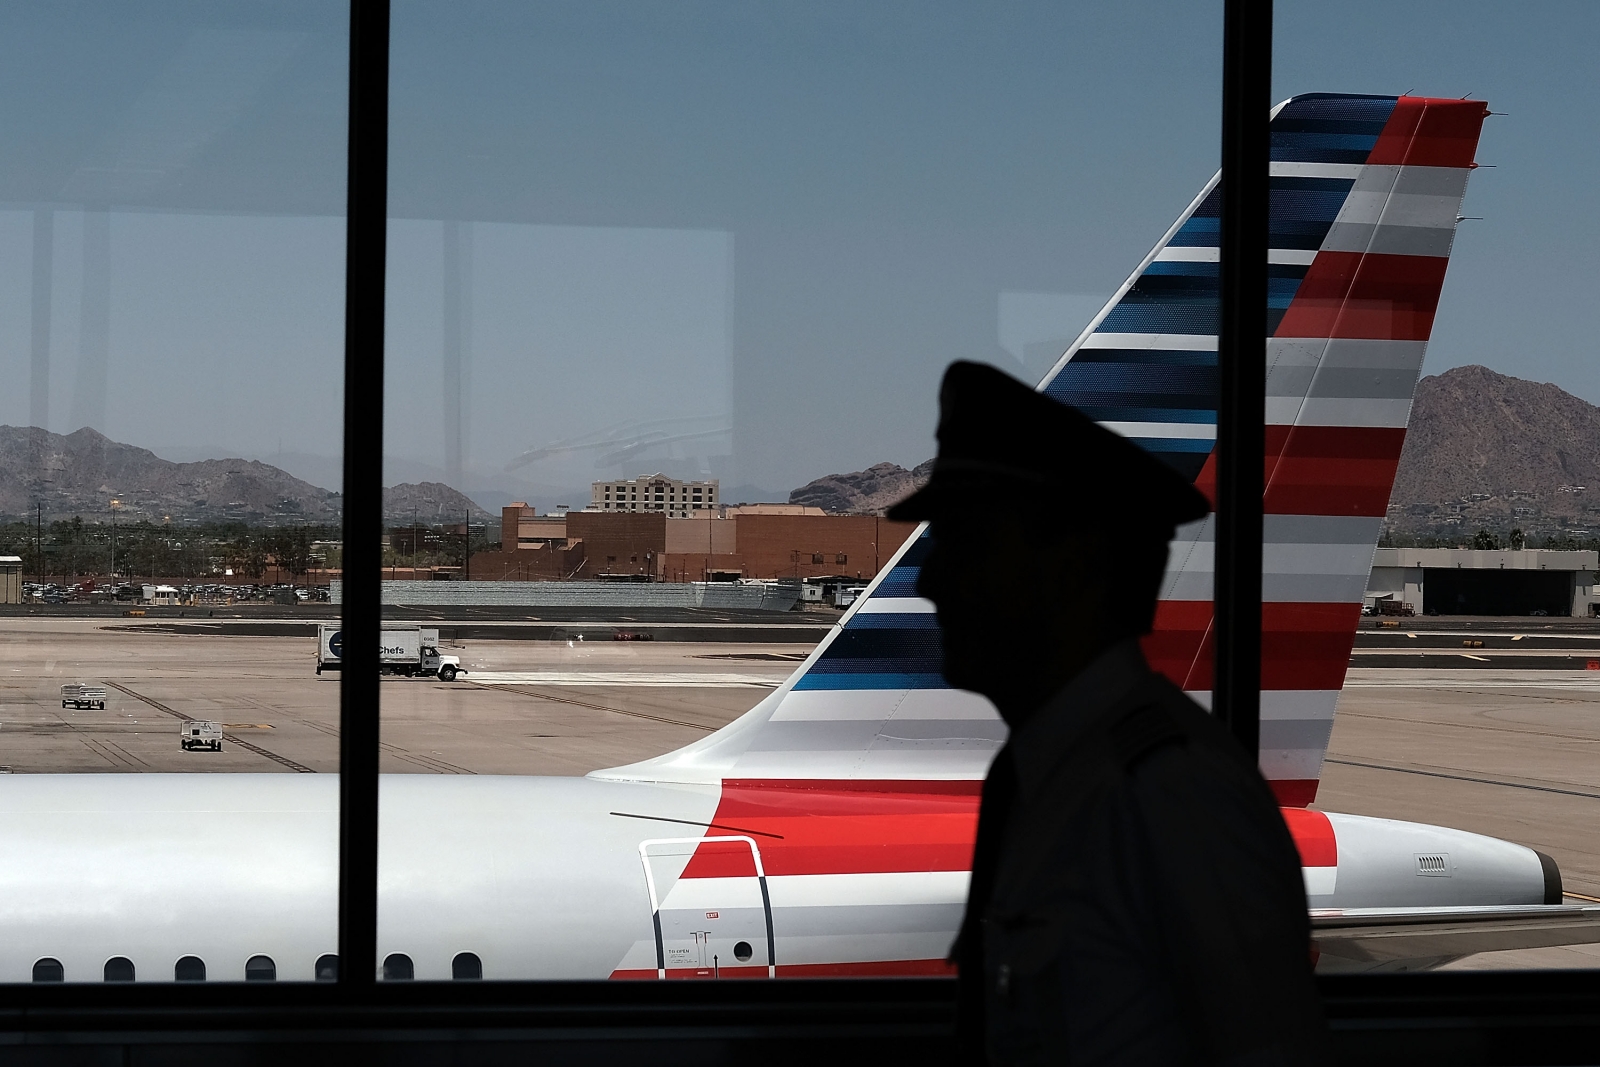 Arizona is so hot that flights are being cancelled